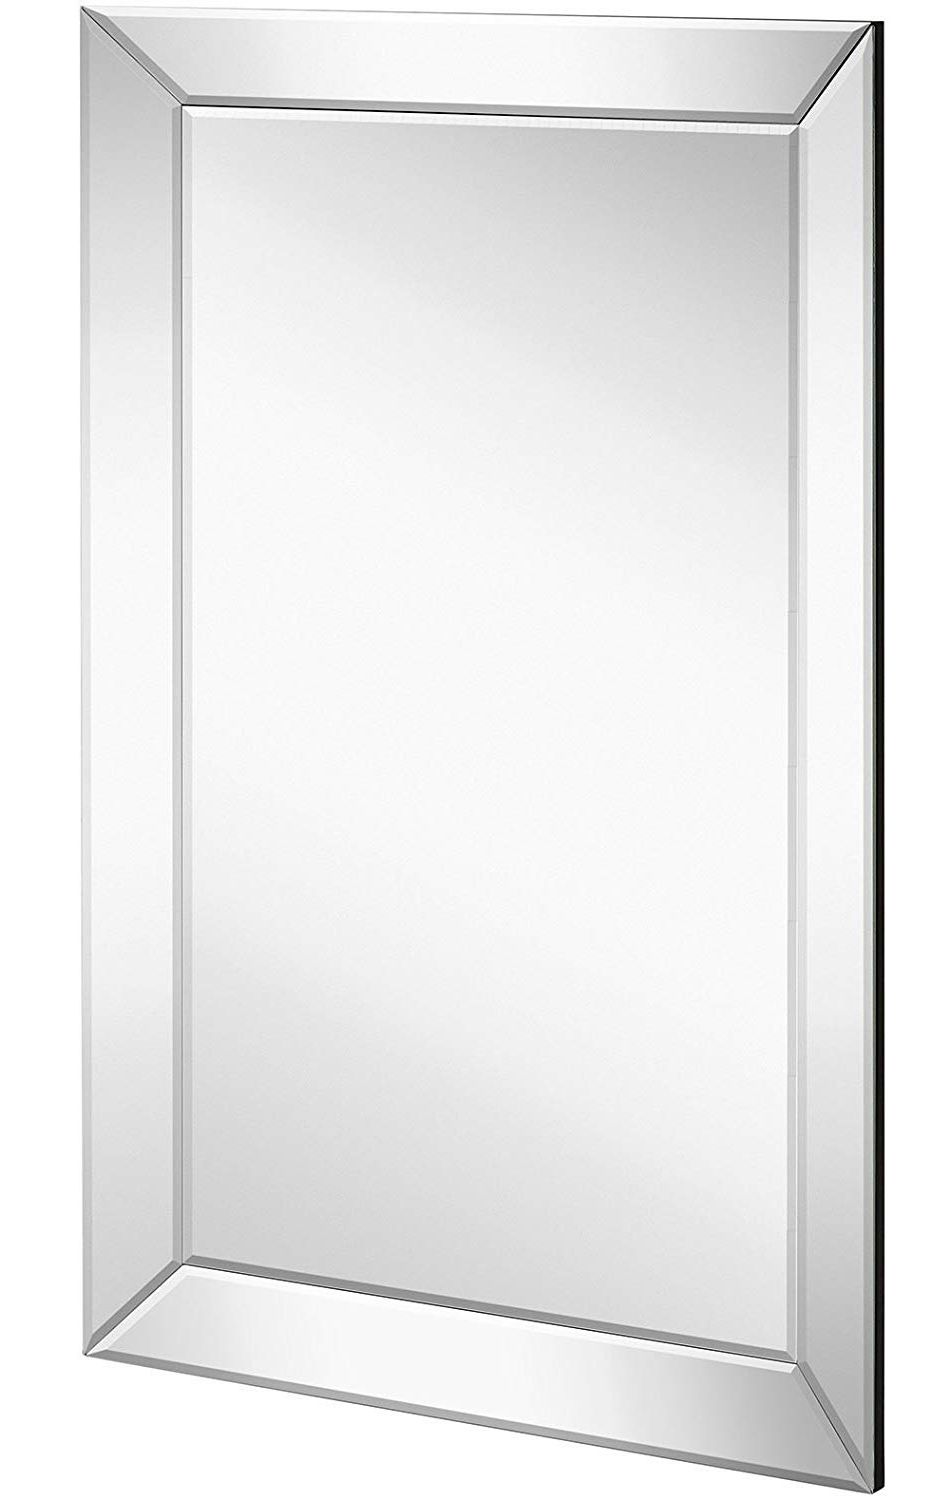 Luxury Mirrored Rectangle Regarding Wall Mirror With Mirror Frame (View 18 of 20)